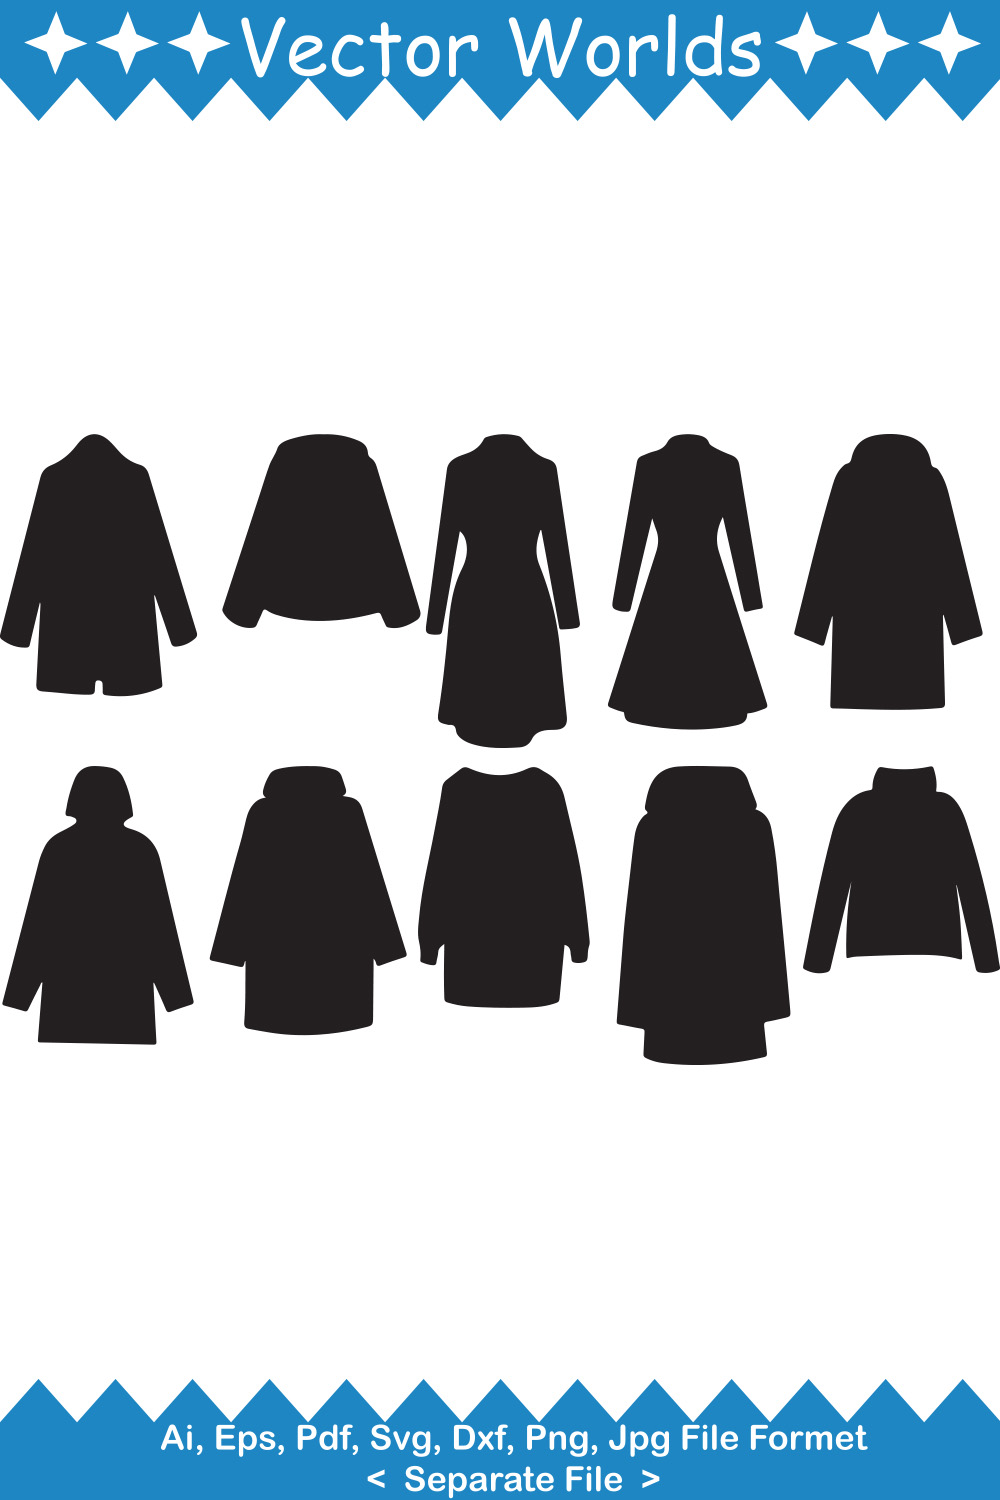 Pack of vector wonderful images of winter coat silhouettes.